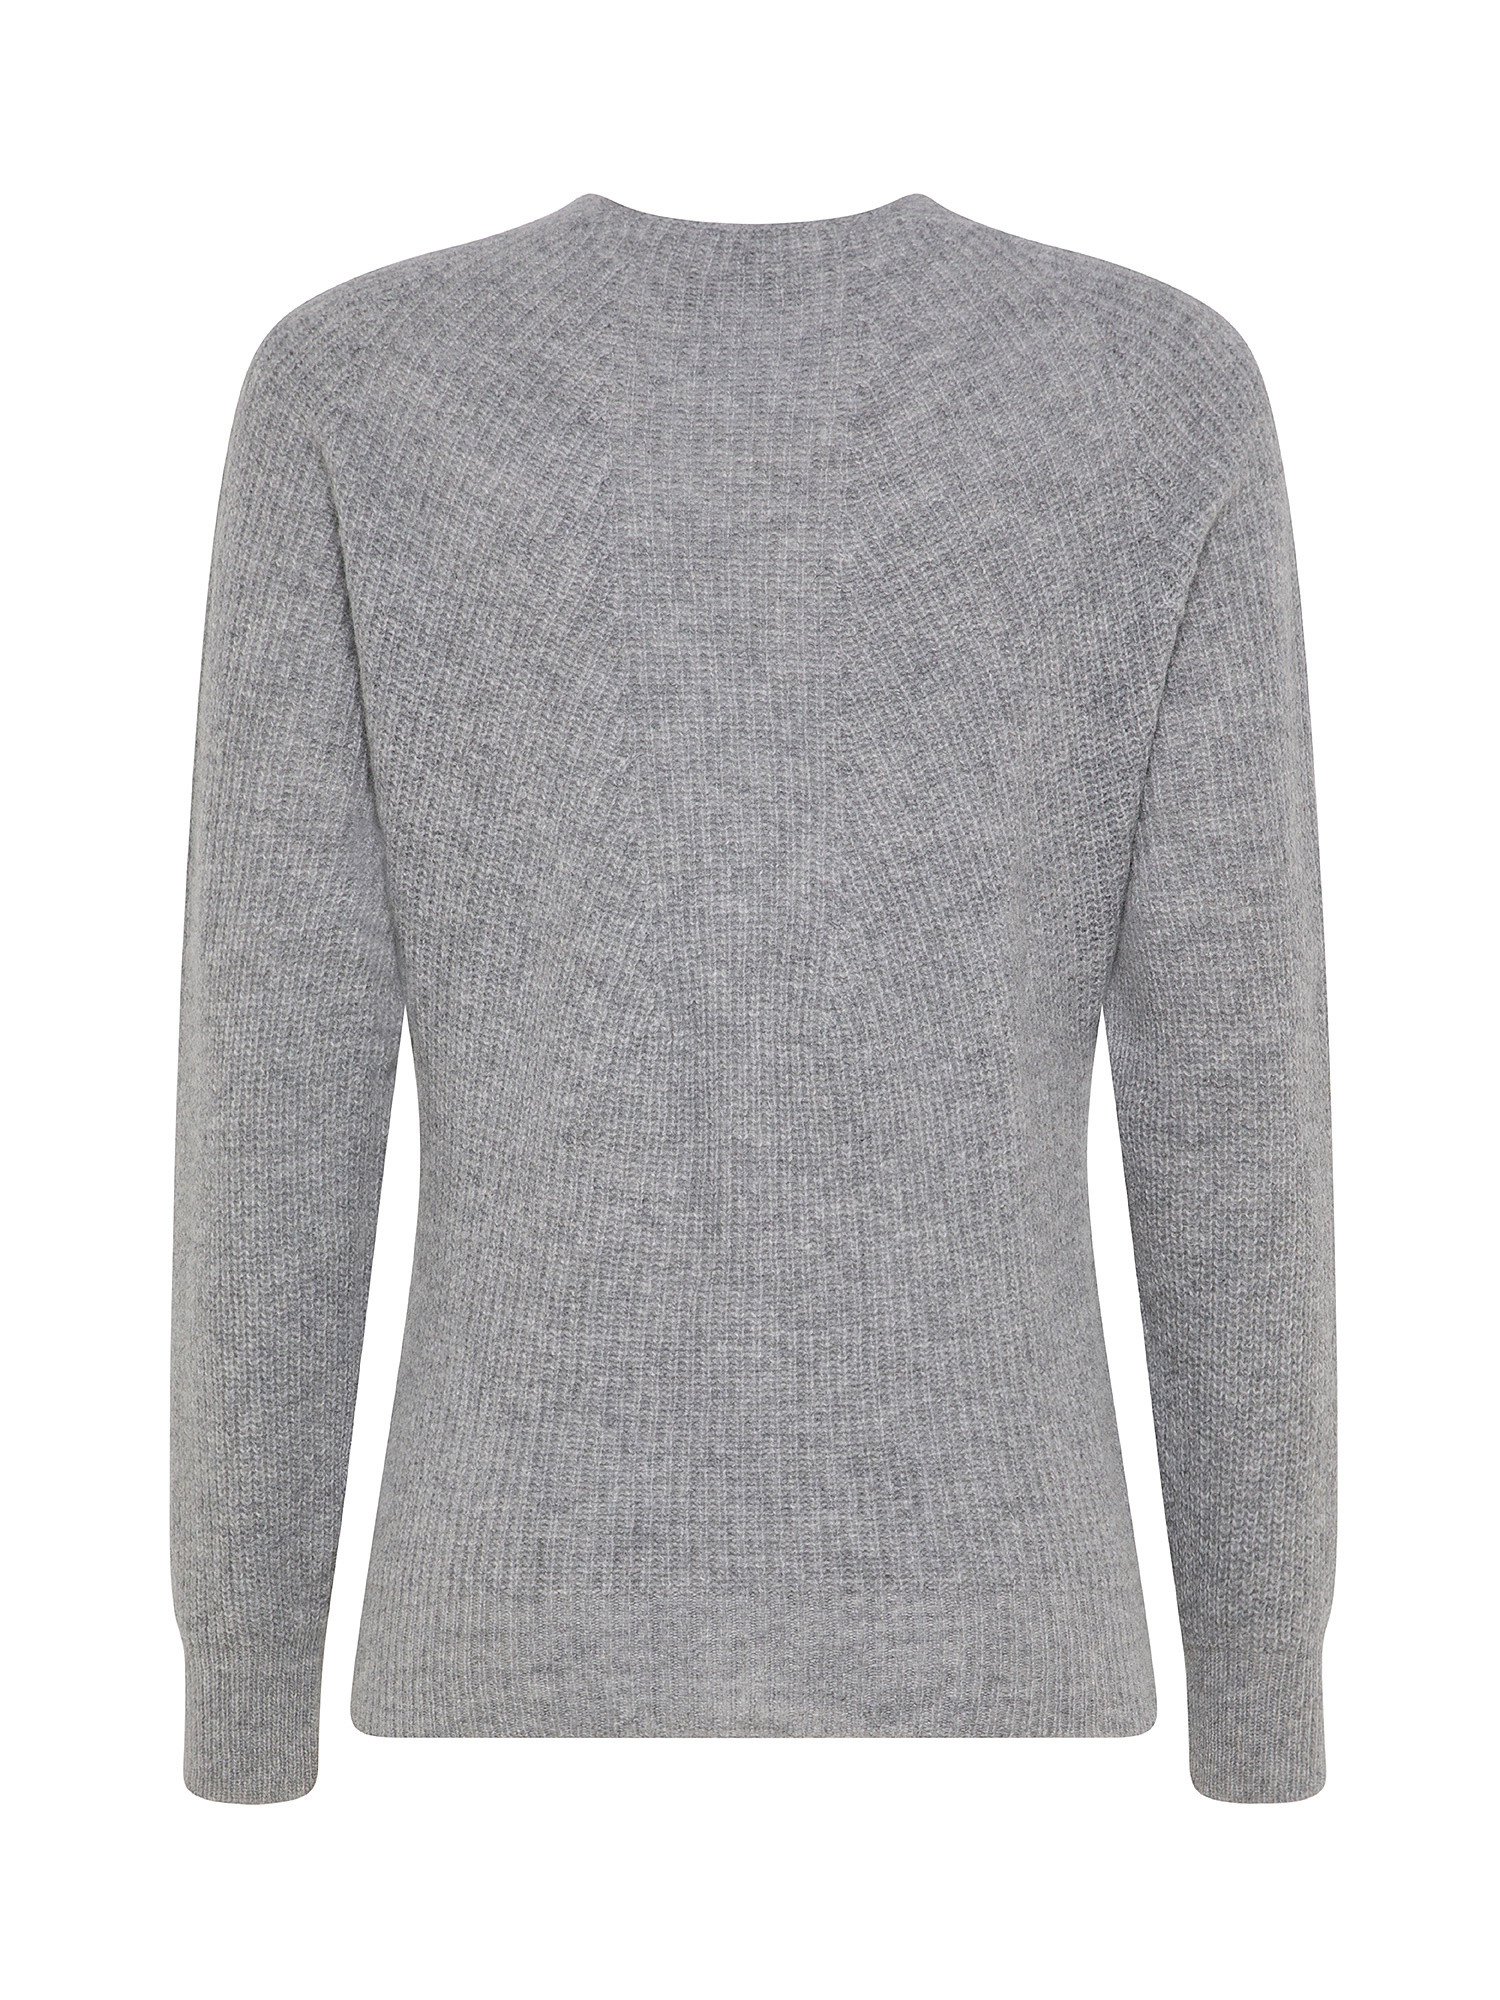 K Collection - Cardigan, Grigio, large image number 1